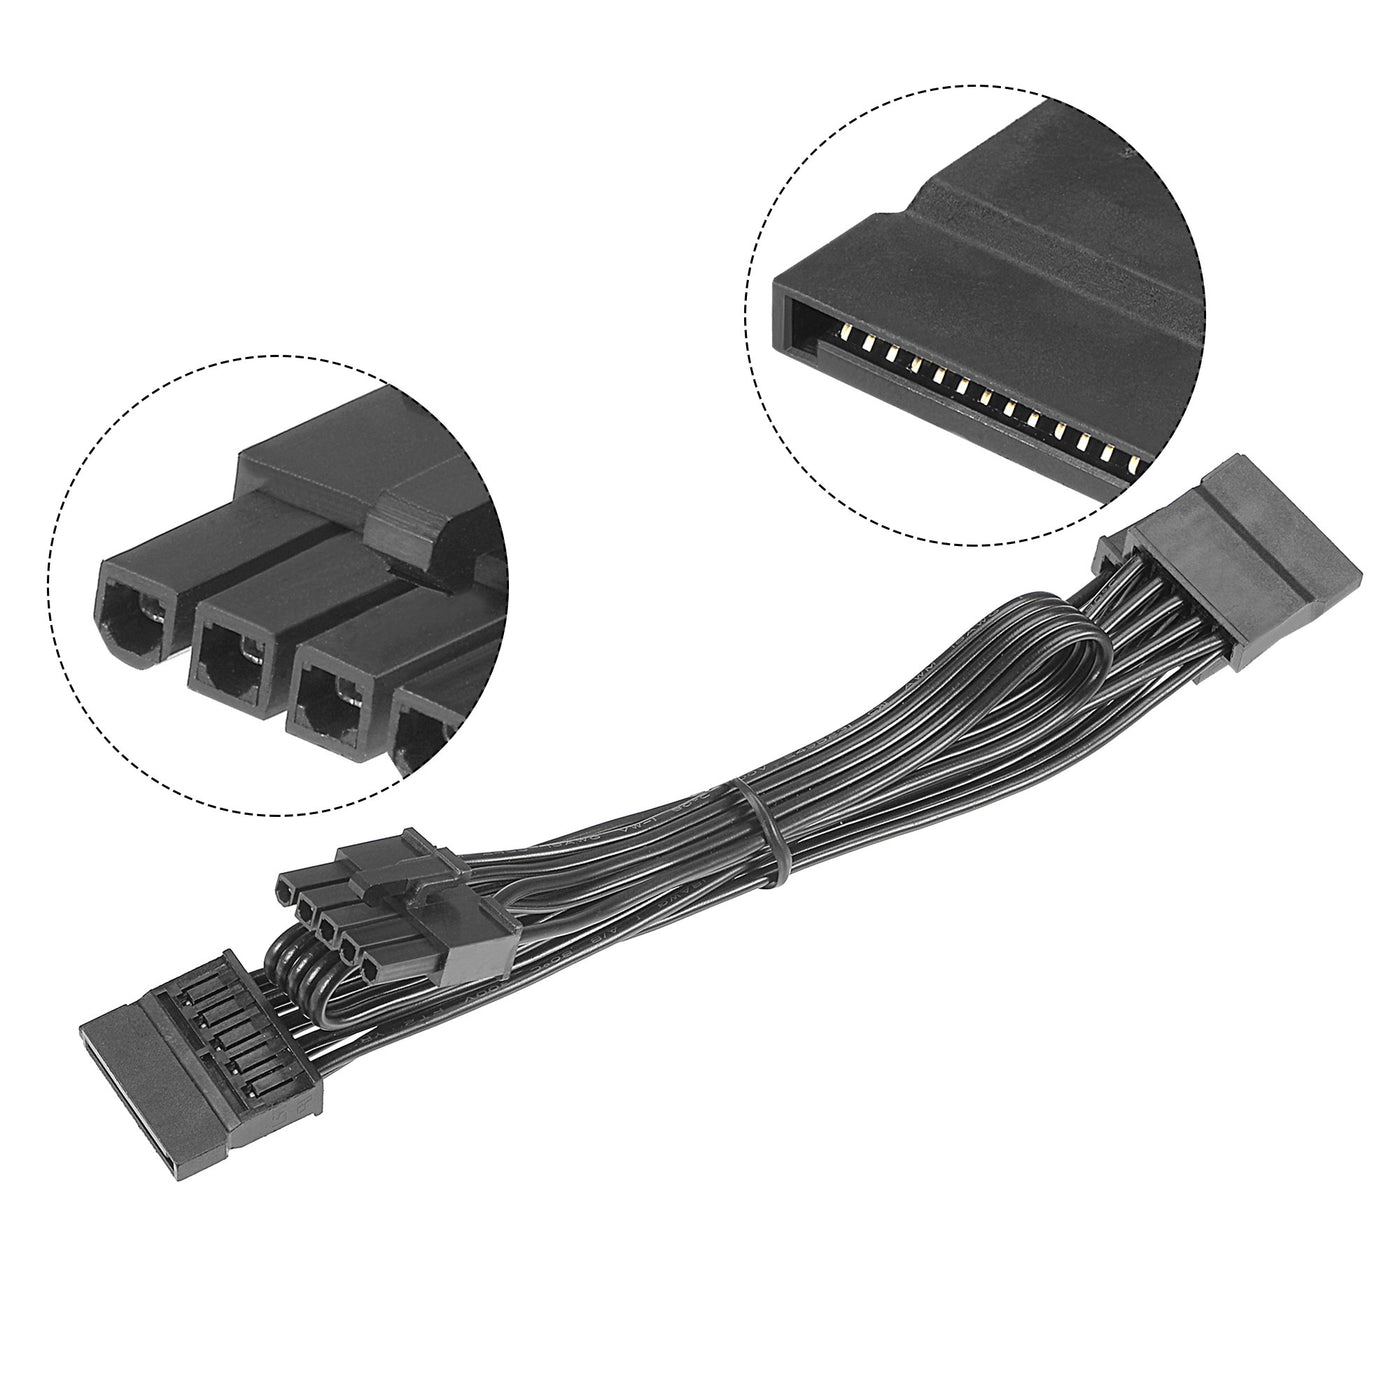 uxcell Uxcell Mainboard Power Cable for Video Card PCIe 5 to 3 Splitter SATA 18 AWG 67cm